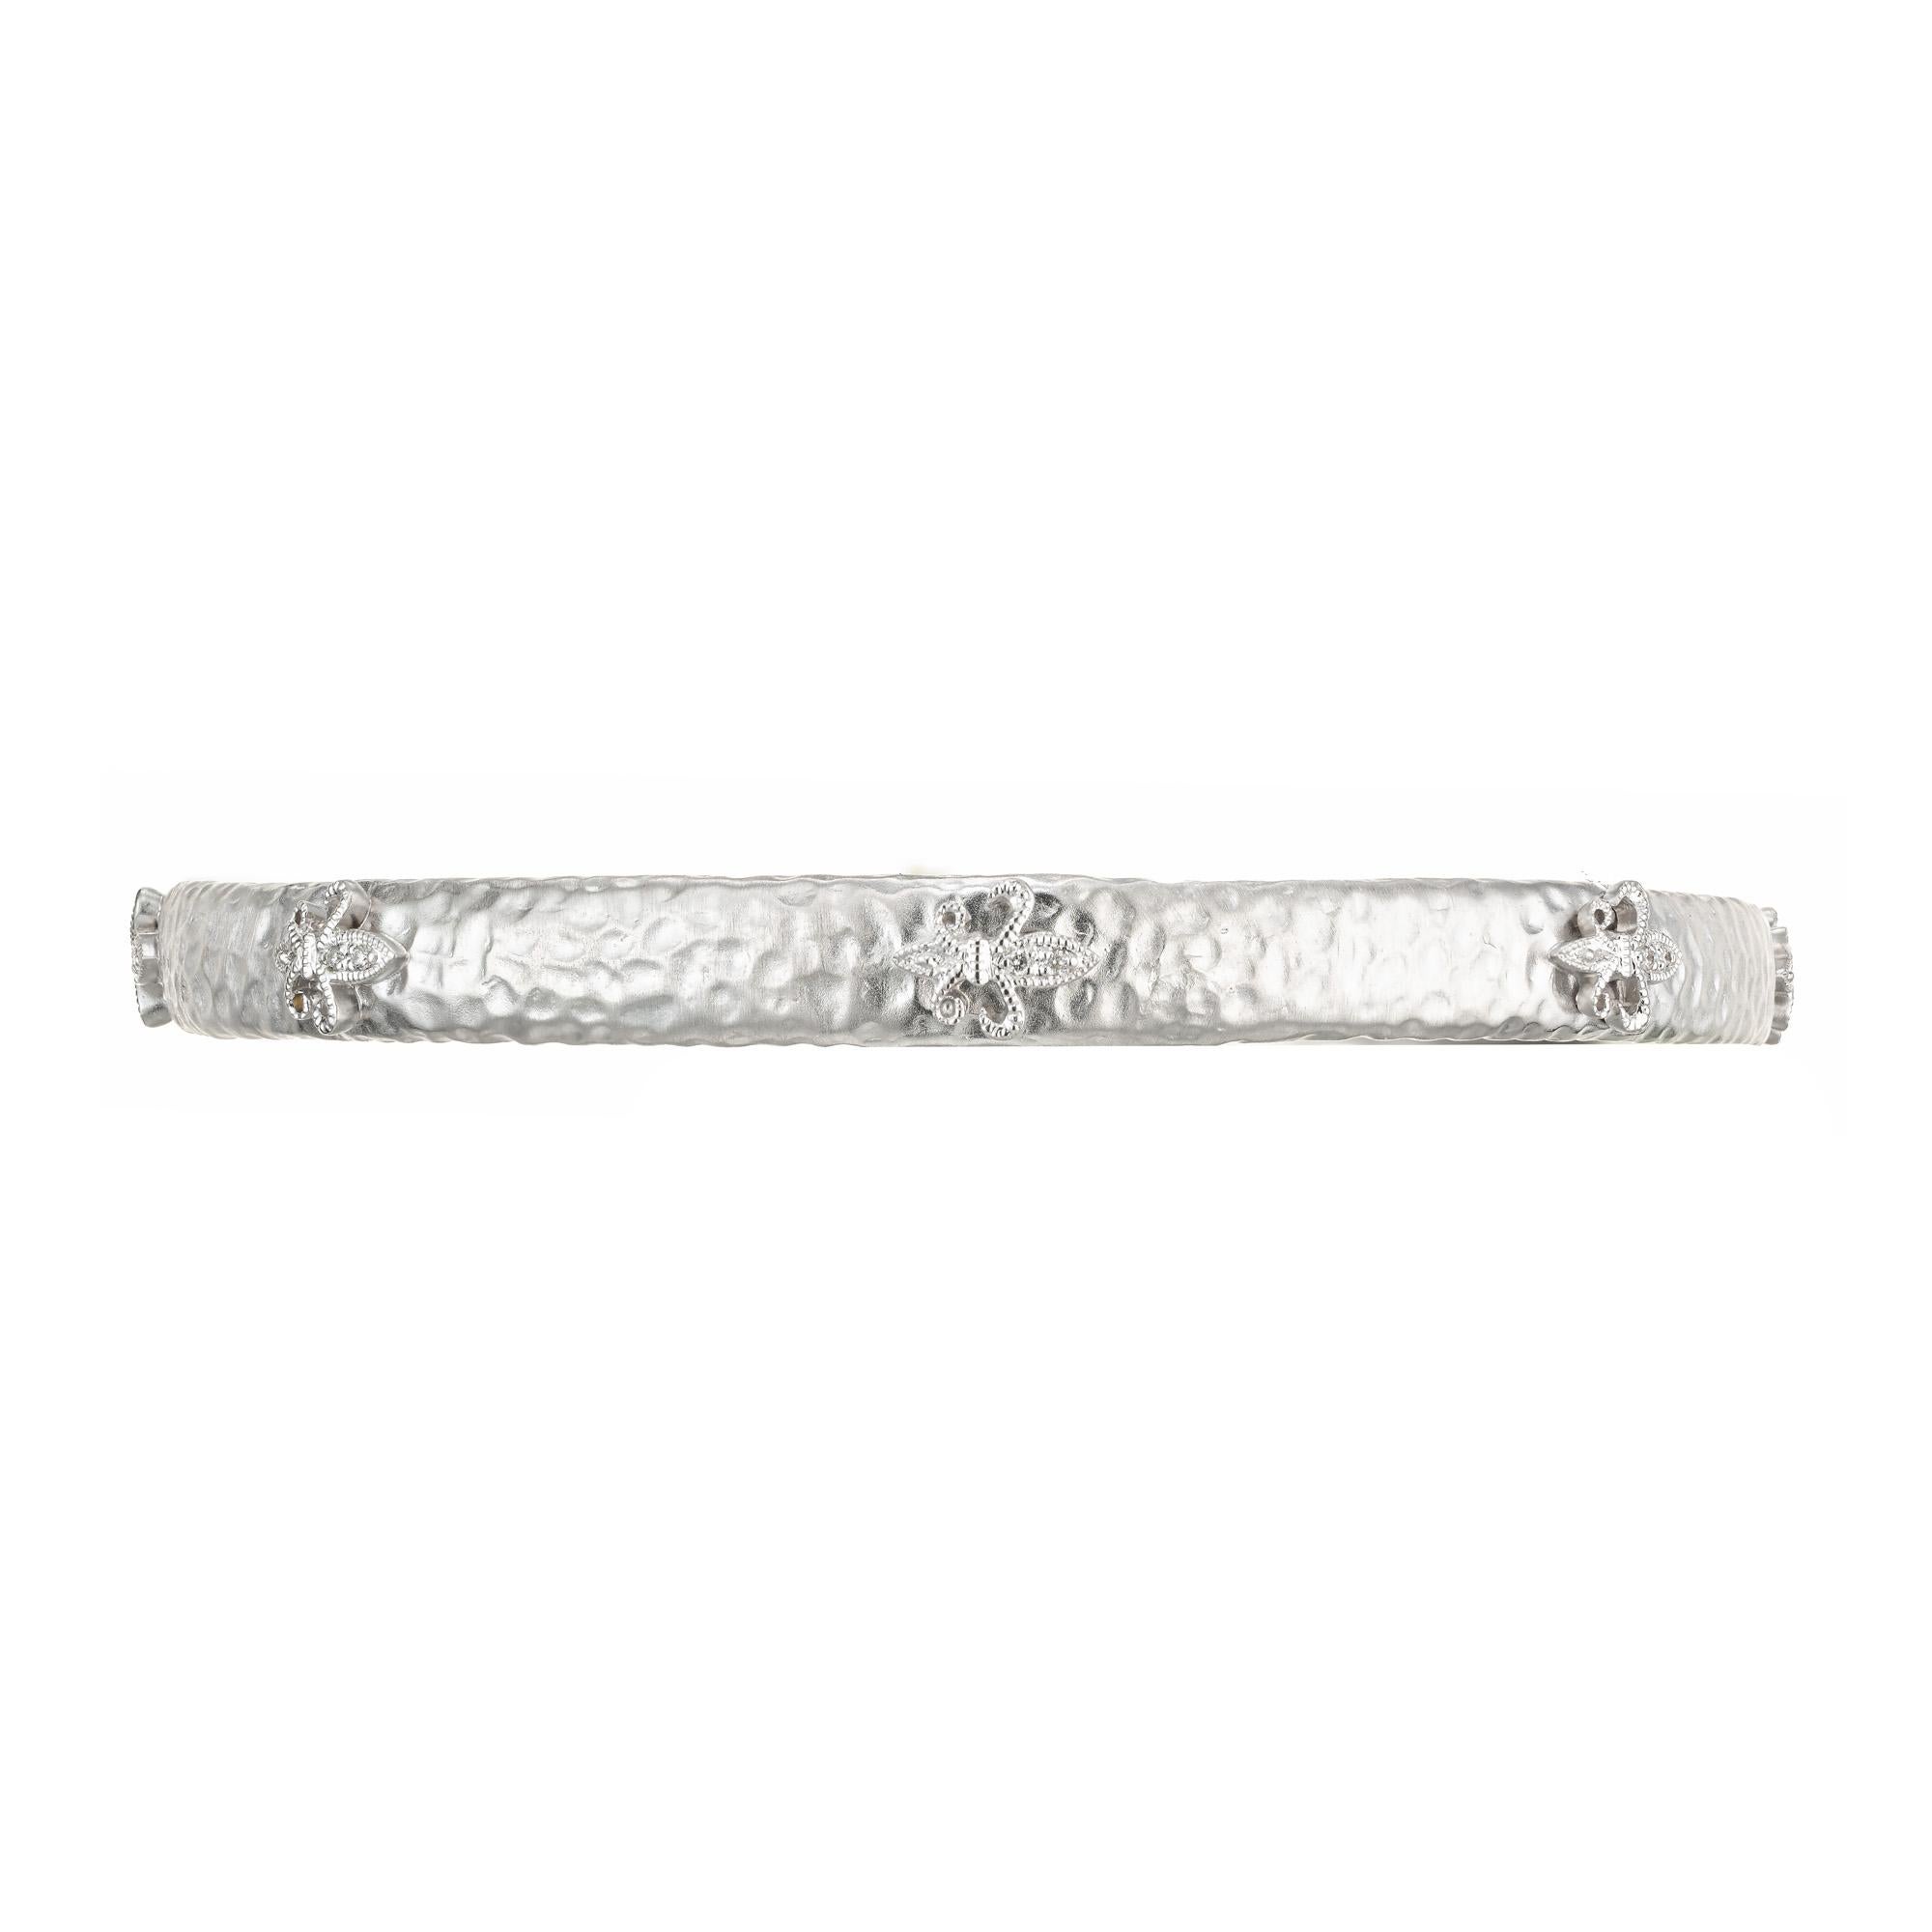 Diamond bangle bracelet. 14k white gold textured slip on bangle bracelet with 16 round brilliant cut diamonds set in Fleur De Lis sections. Fits a 7.5 Inch wrist.
Follow us on our 1stdibs storefront to view our weekly new additions and 5 Star